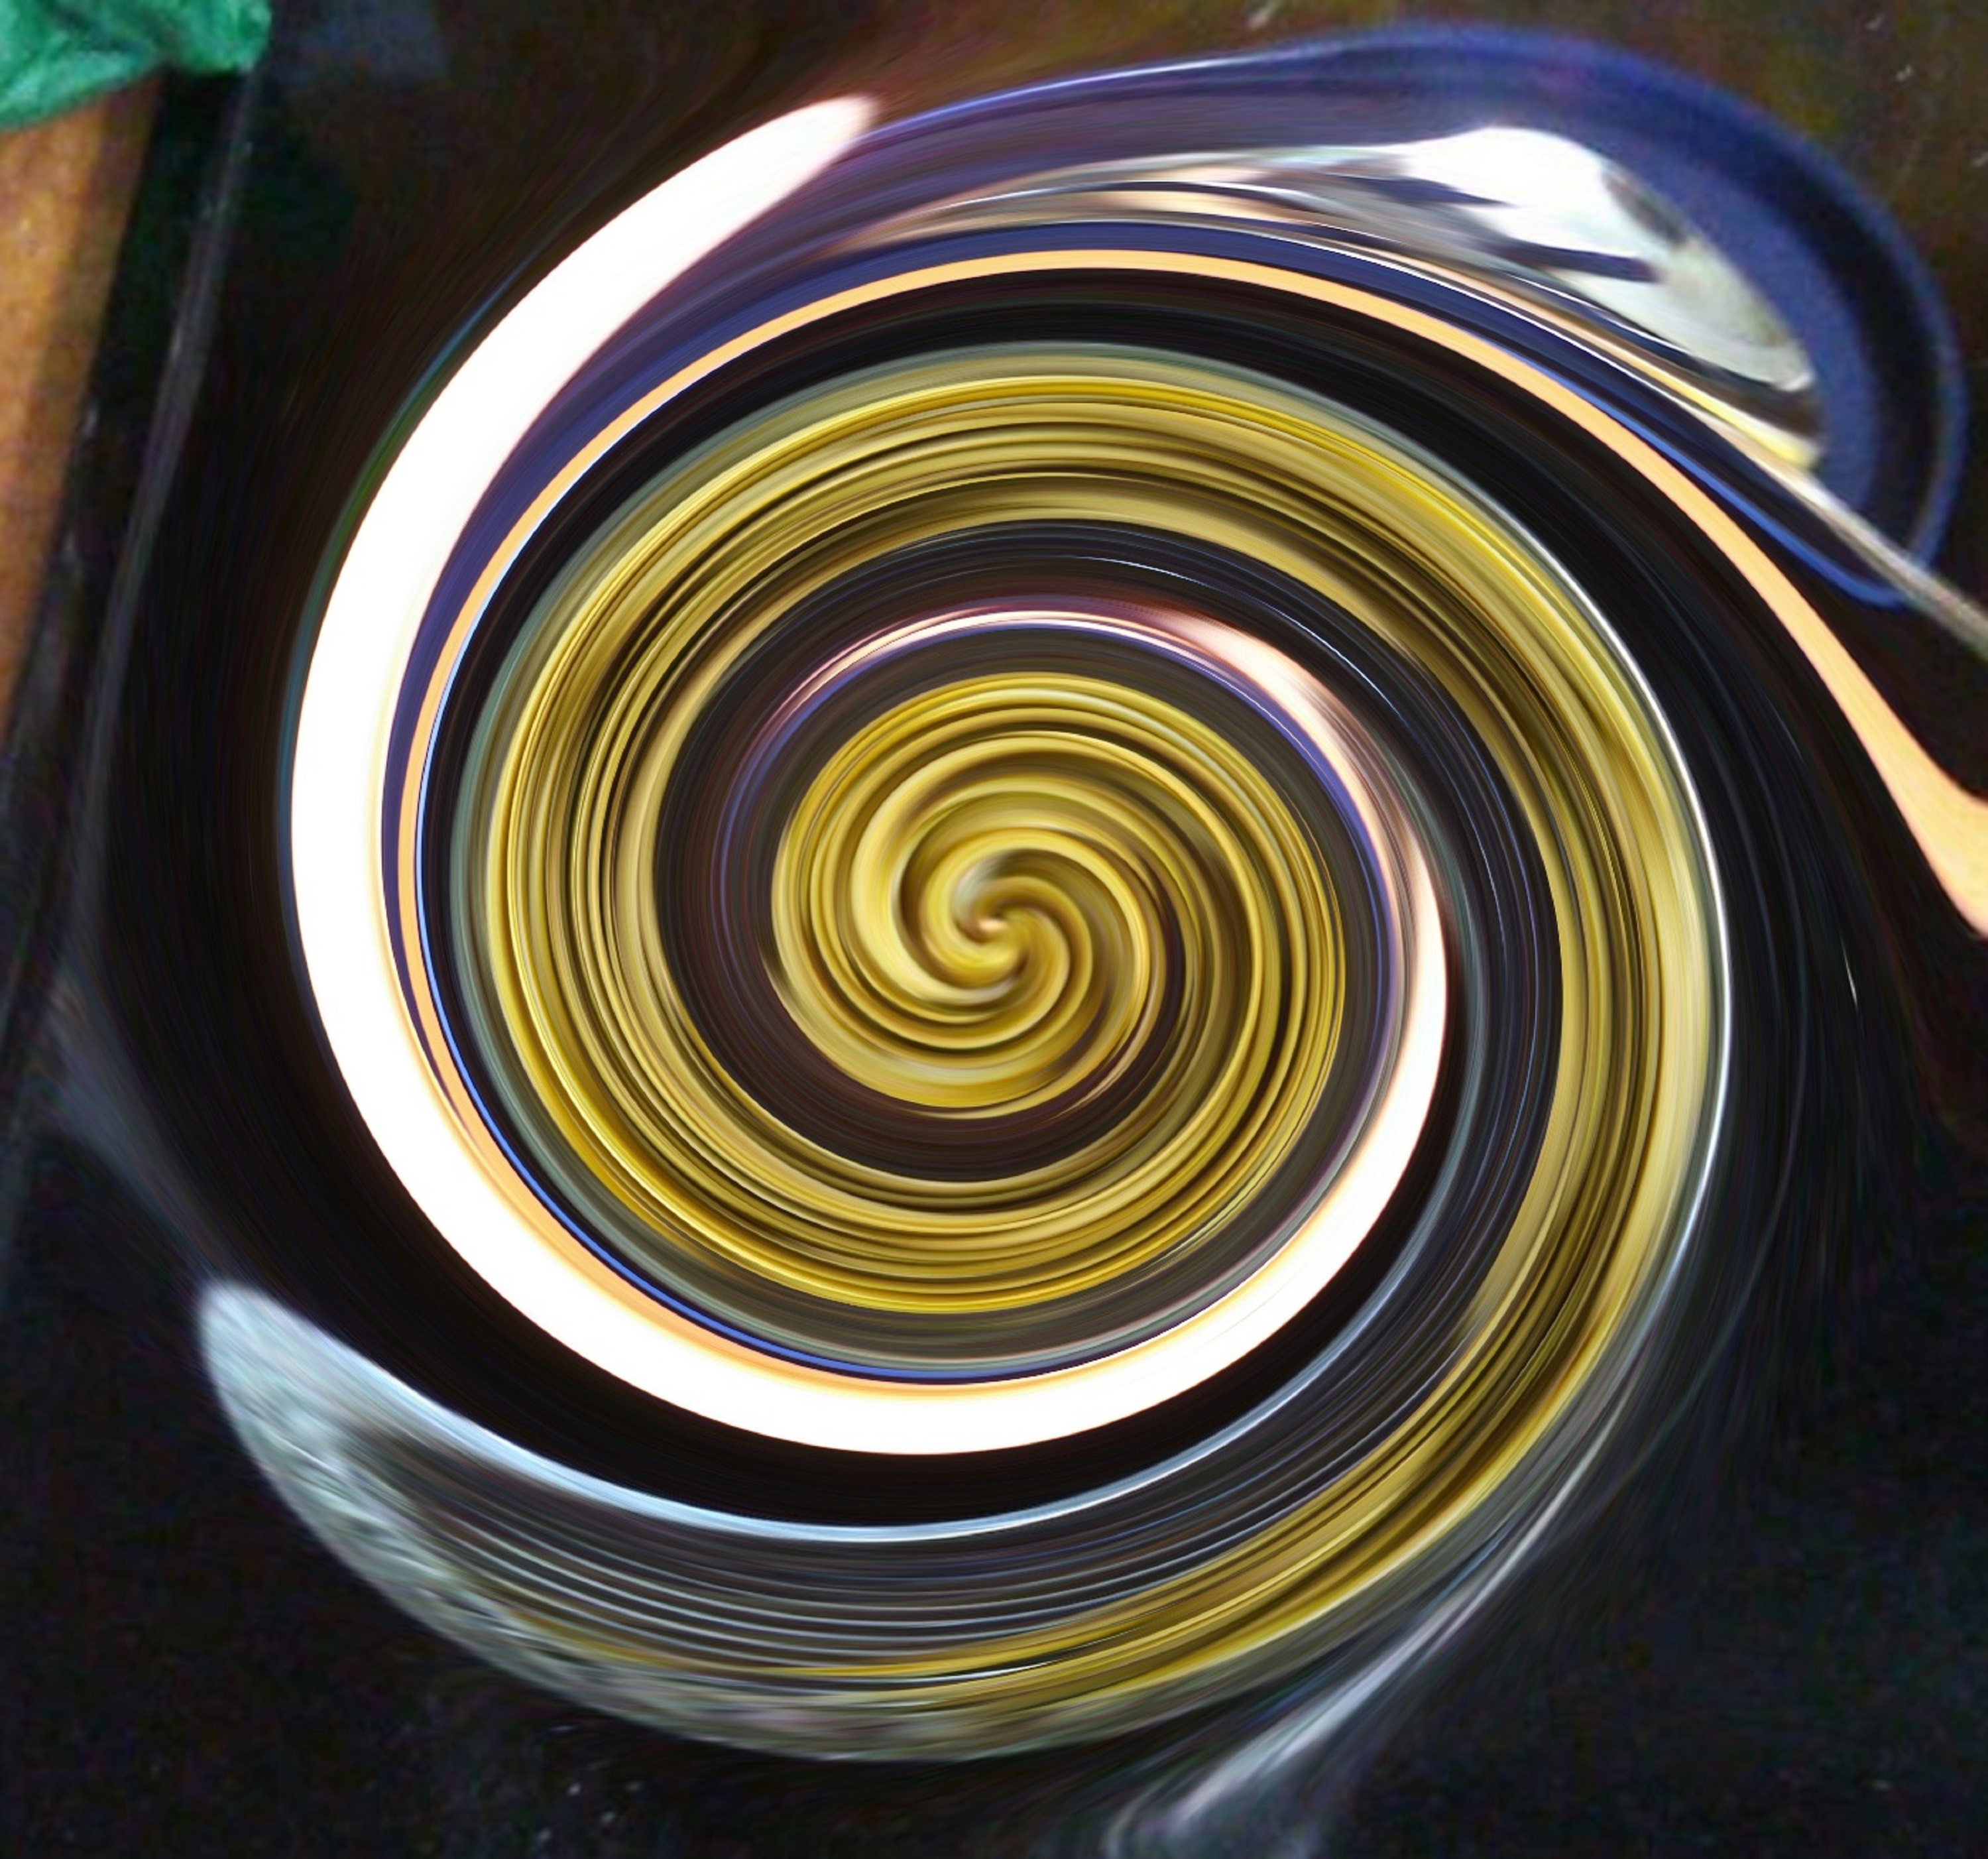 Previous photo I took of bowl of beans with Swirl effect x902 on LunaPic.com